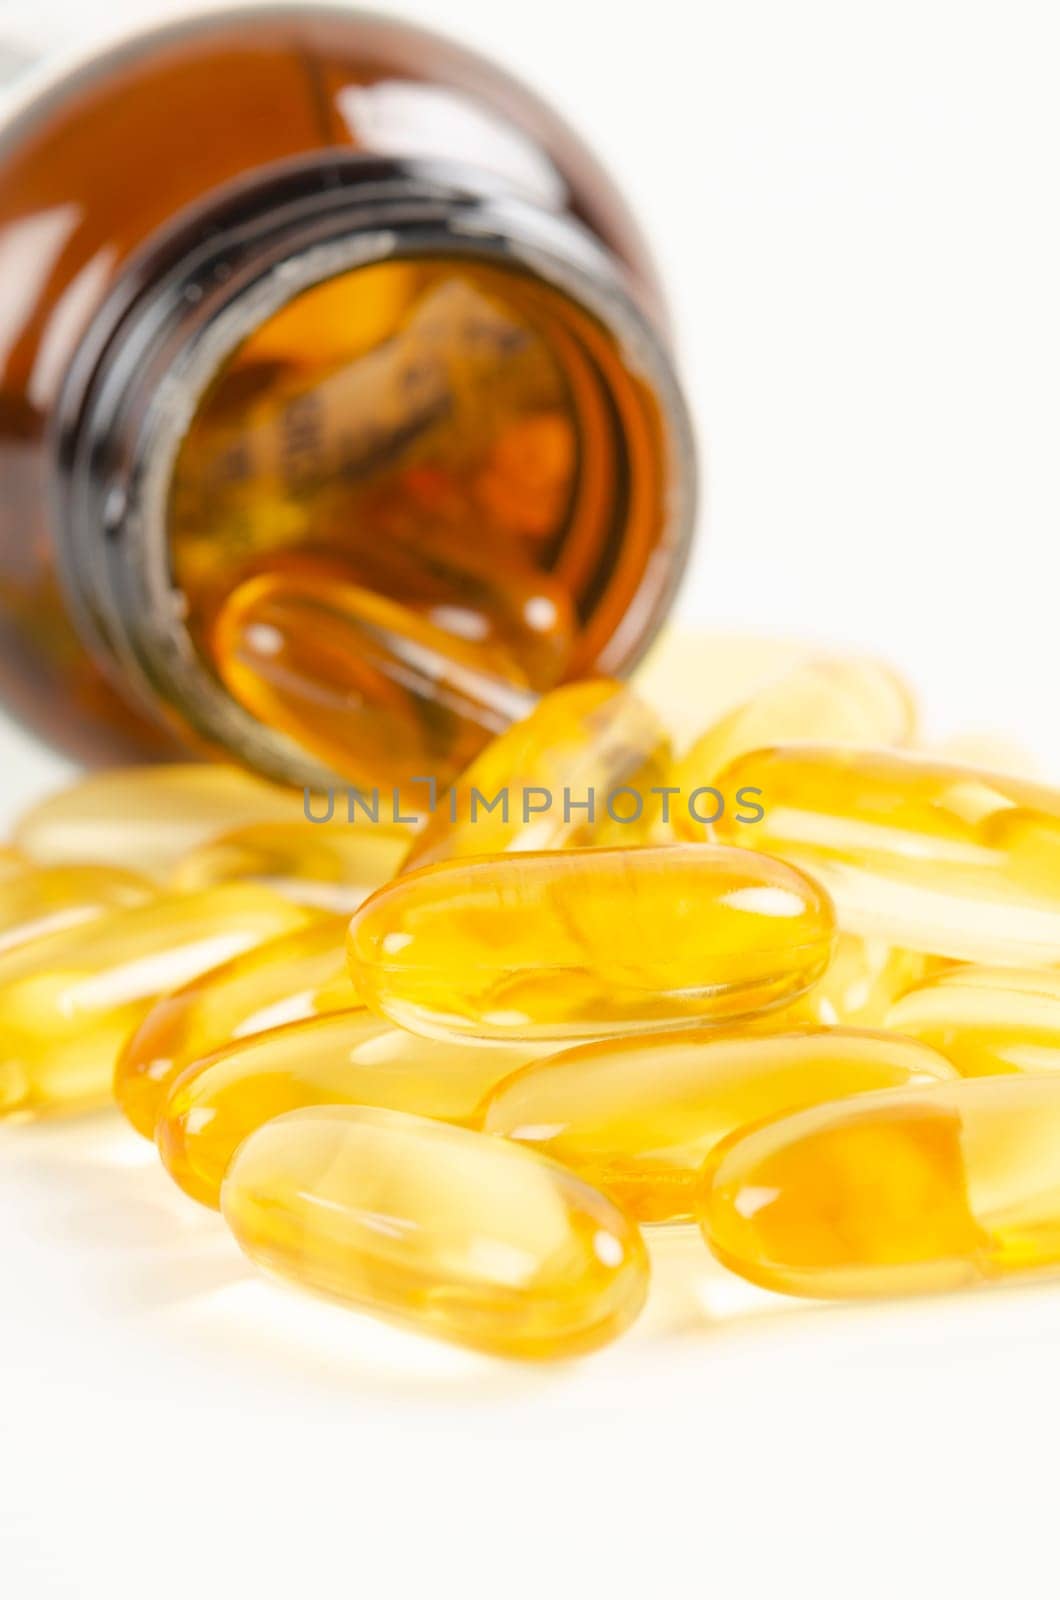 The Fish oil capsules in a glass bottle on white background. by Gamjai